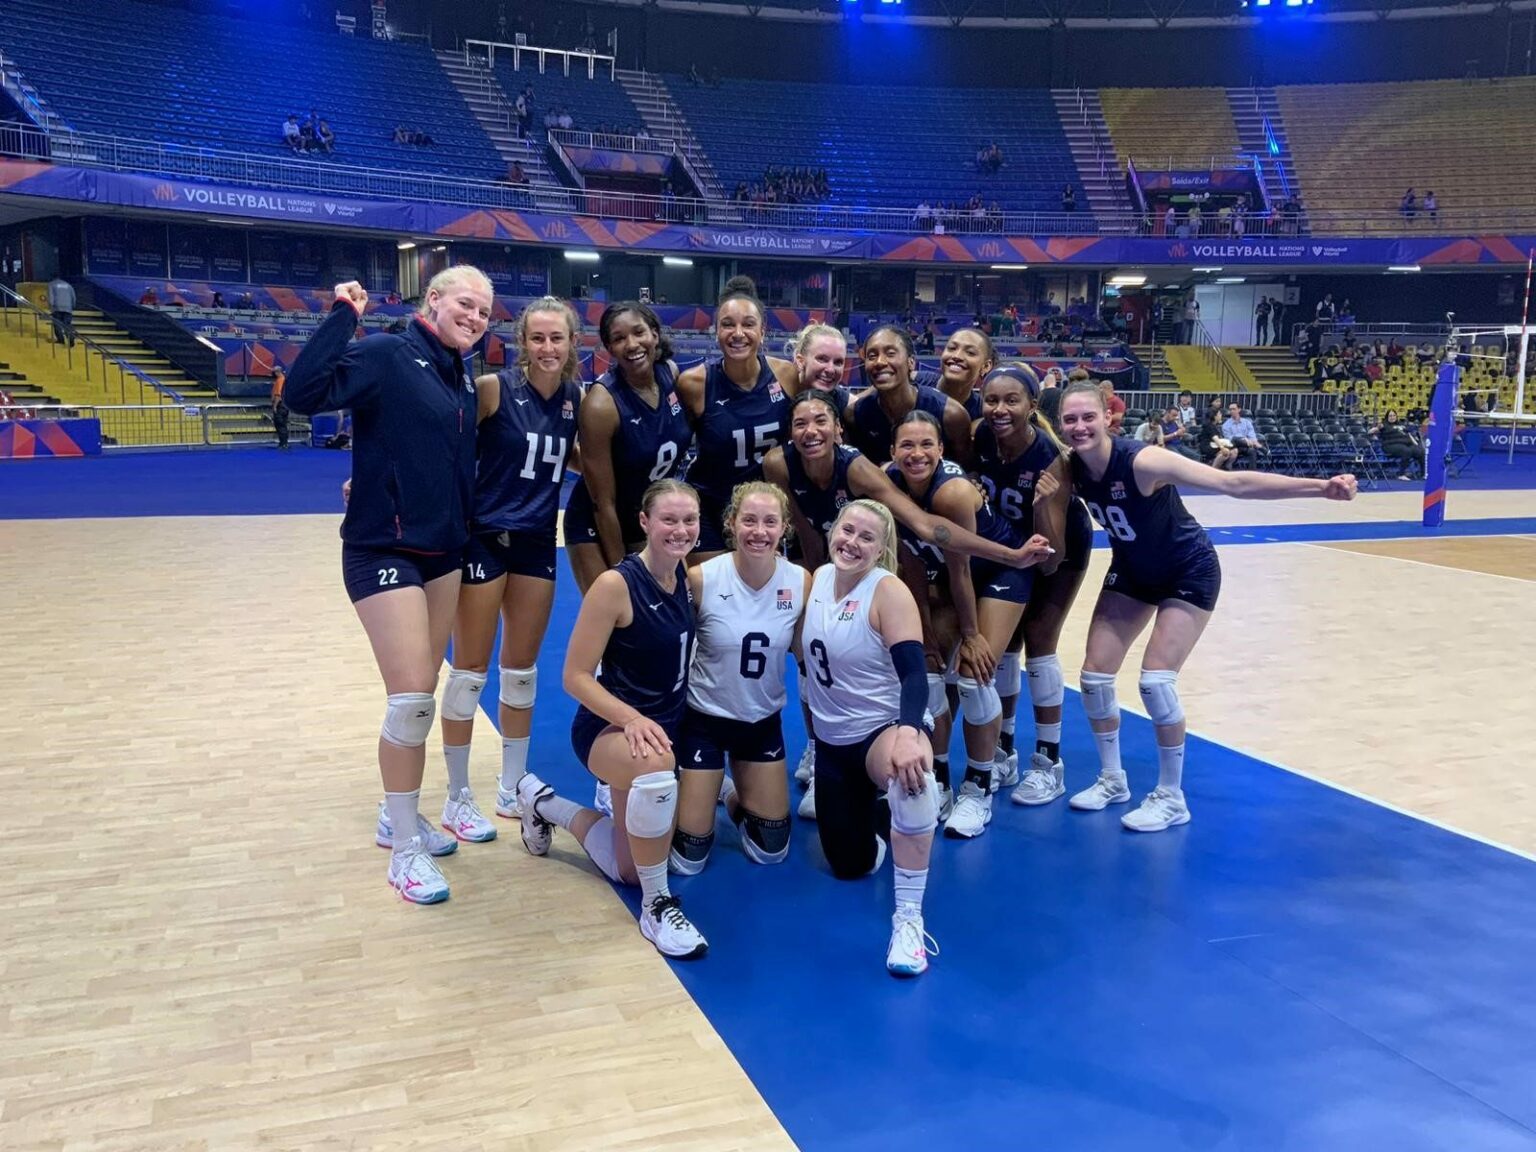 U S Women Sweep Thailand To Move To 6 0 At Vnl Usa Volleyball